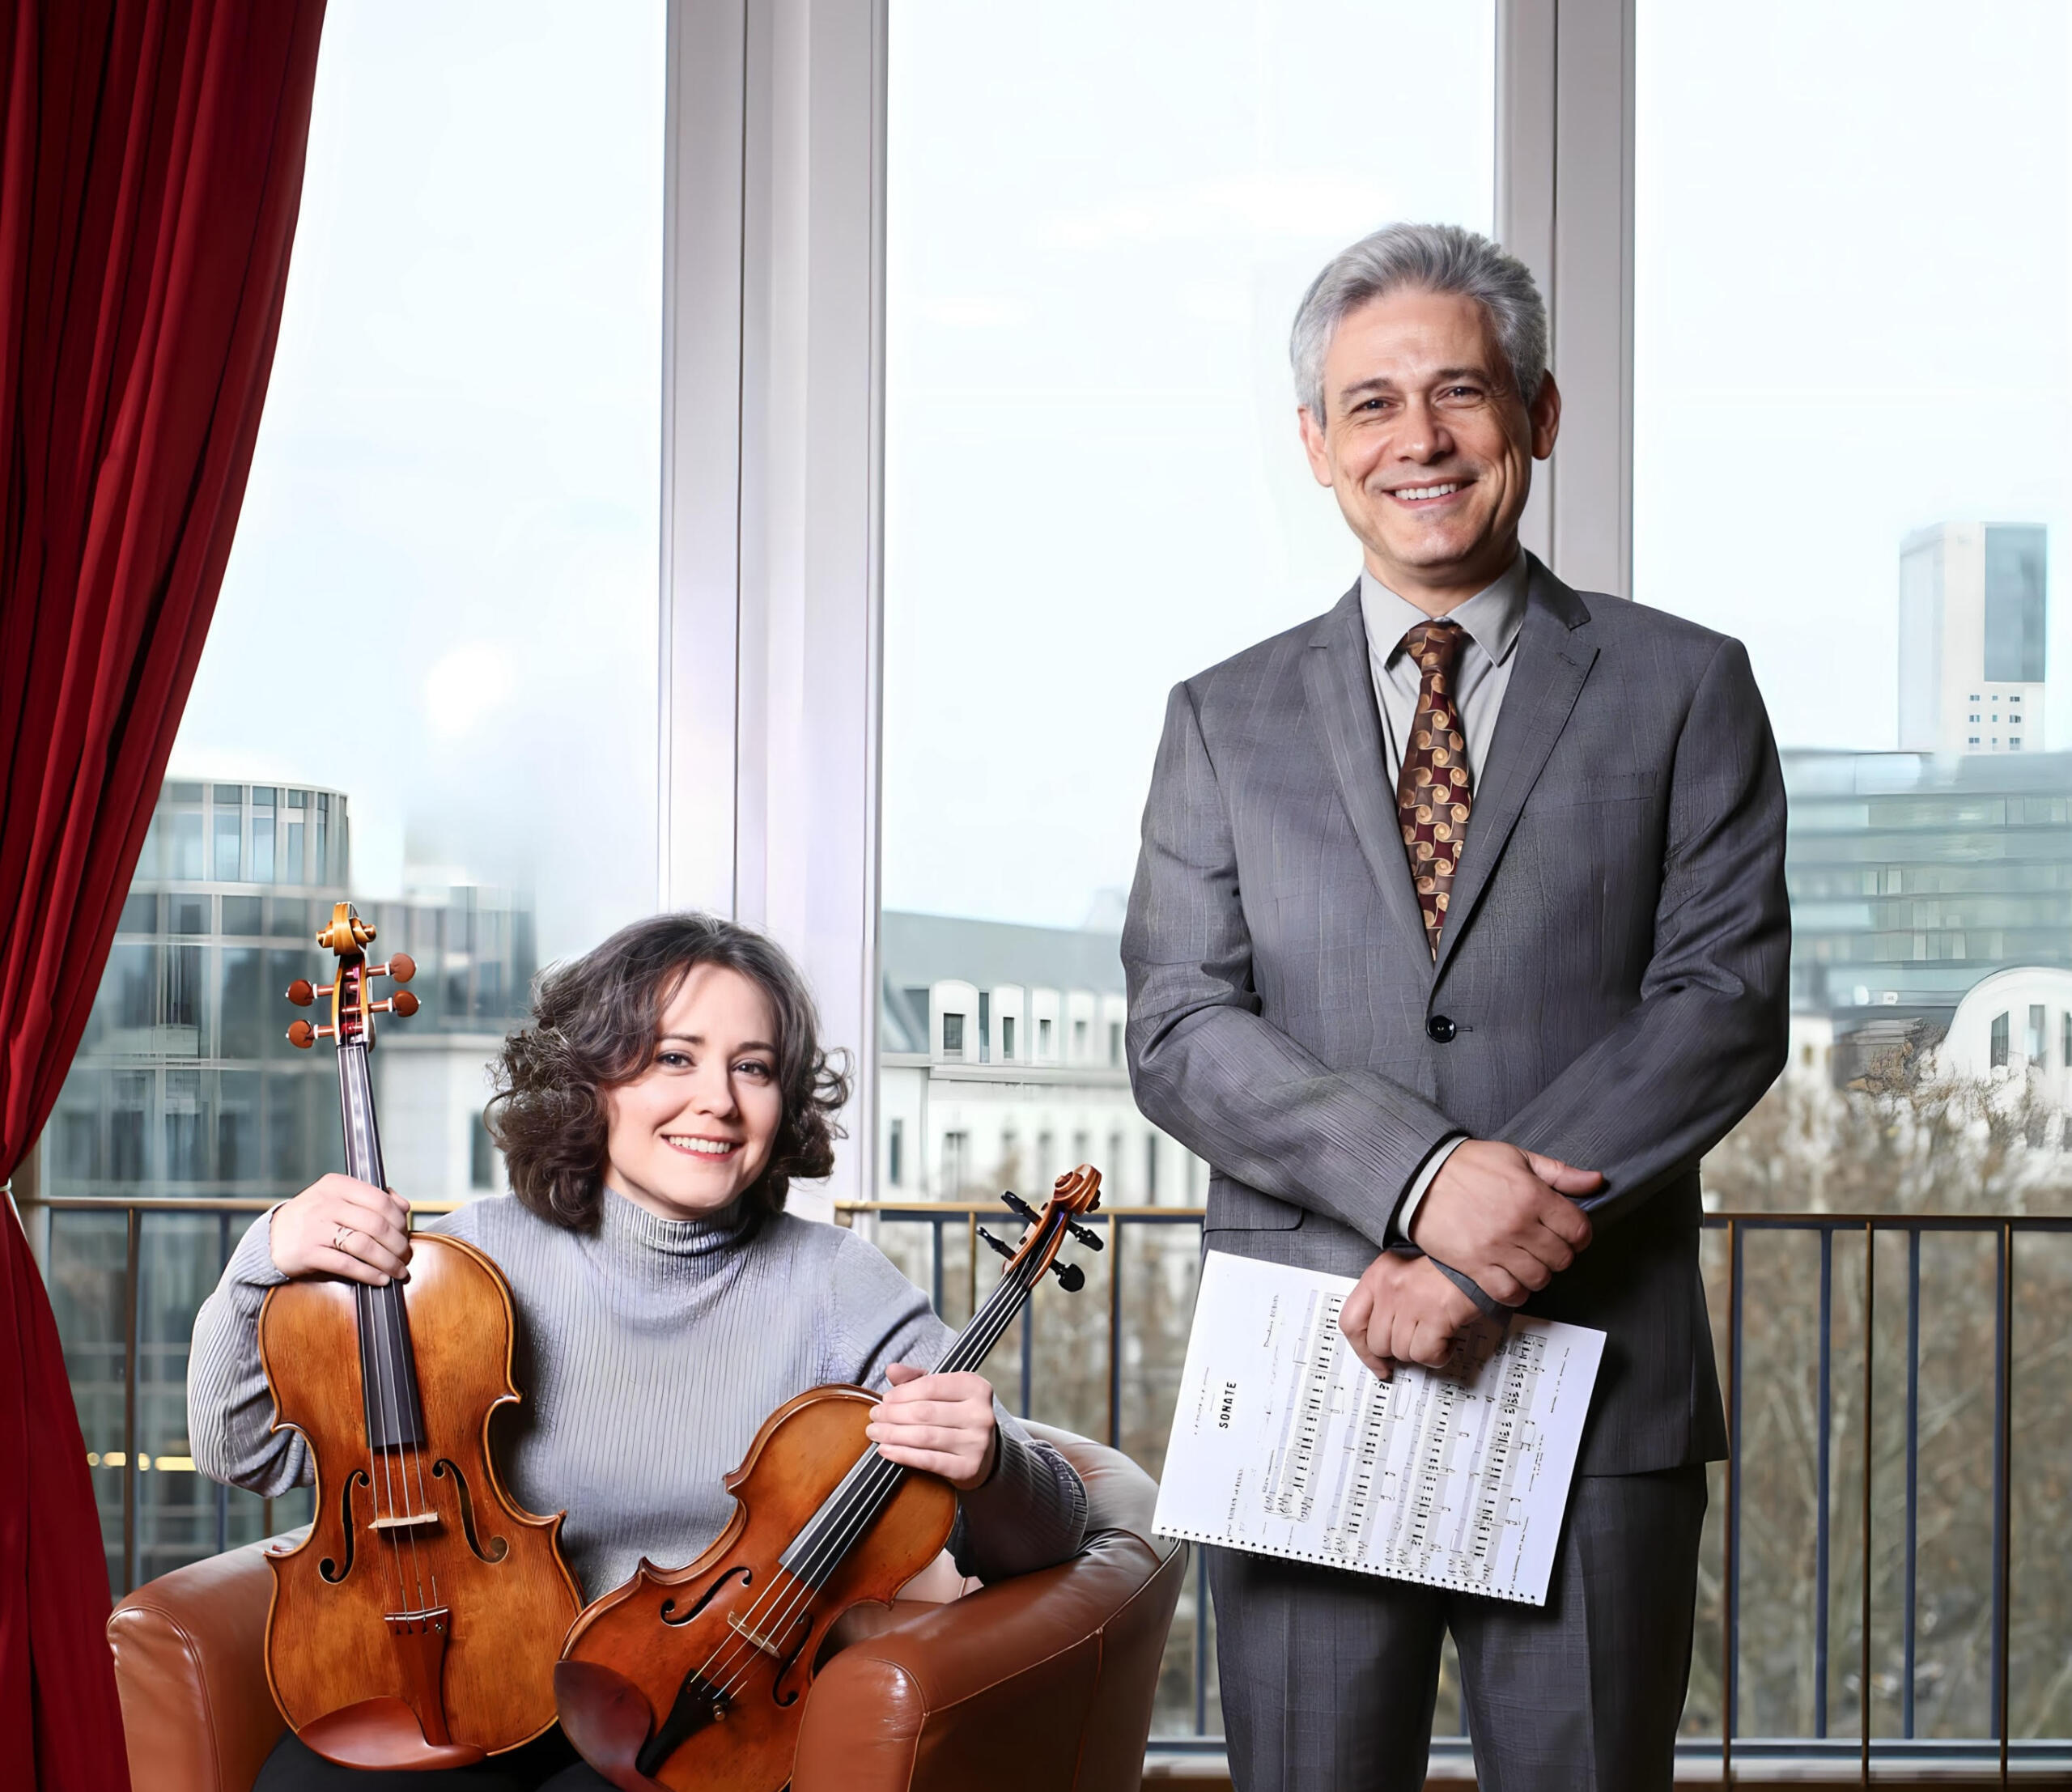 A woman sits on a leather armchair holding a violin and a viola. Next to her is a man in a grey suit. Both are smiling at the camera.